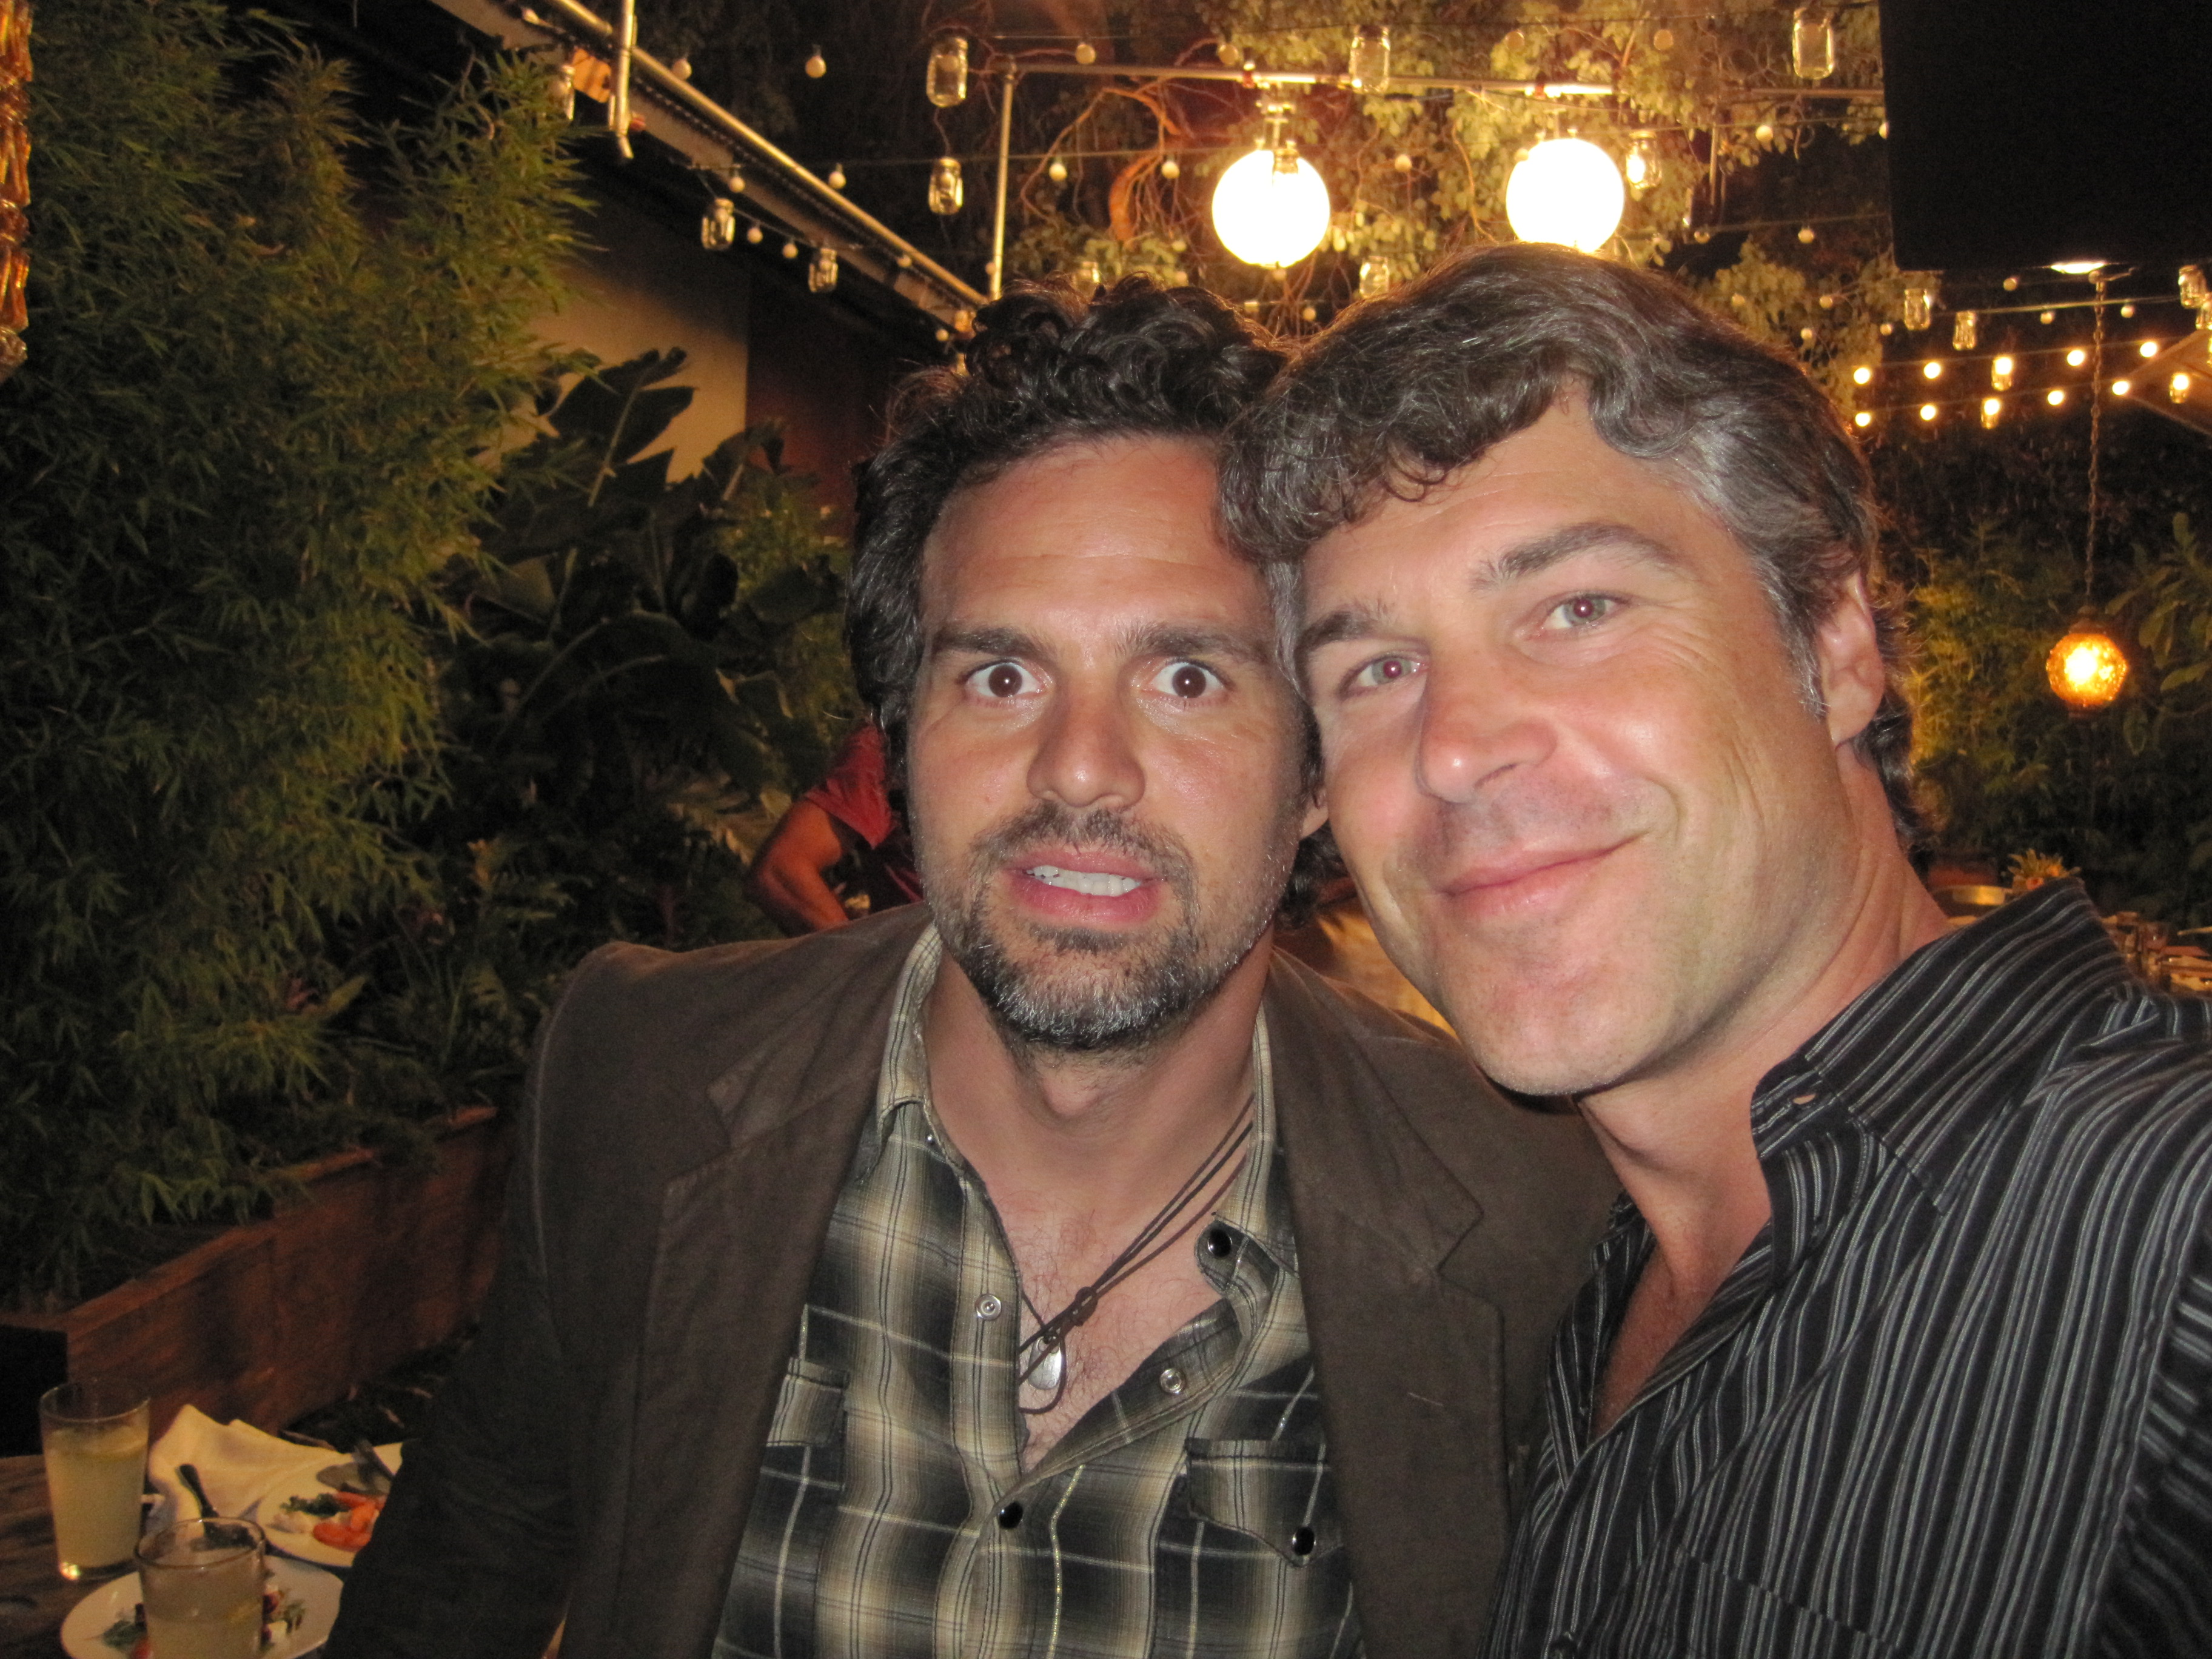 Actor Mark Ruffalo and Producer Todd Labarowski on the set of 'The Kids Are All Right' in Los Angeles, CA on July 30, 2009.